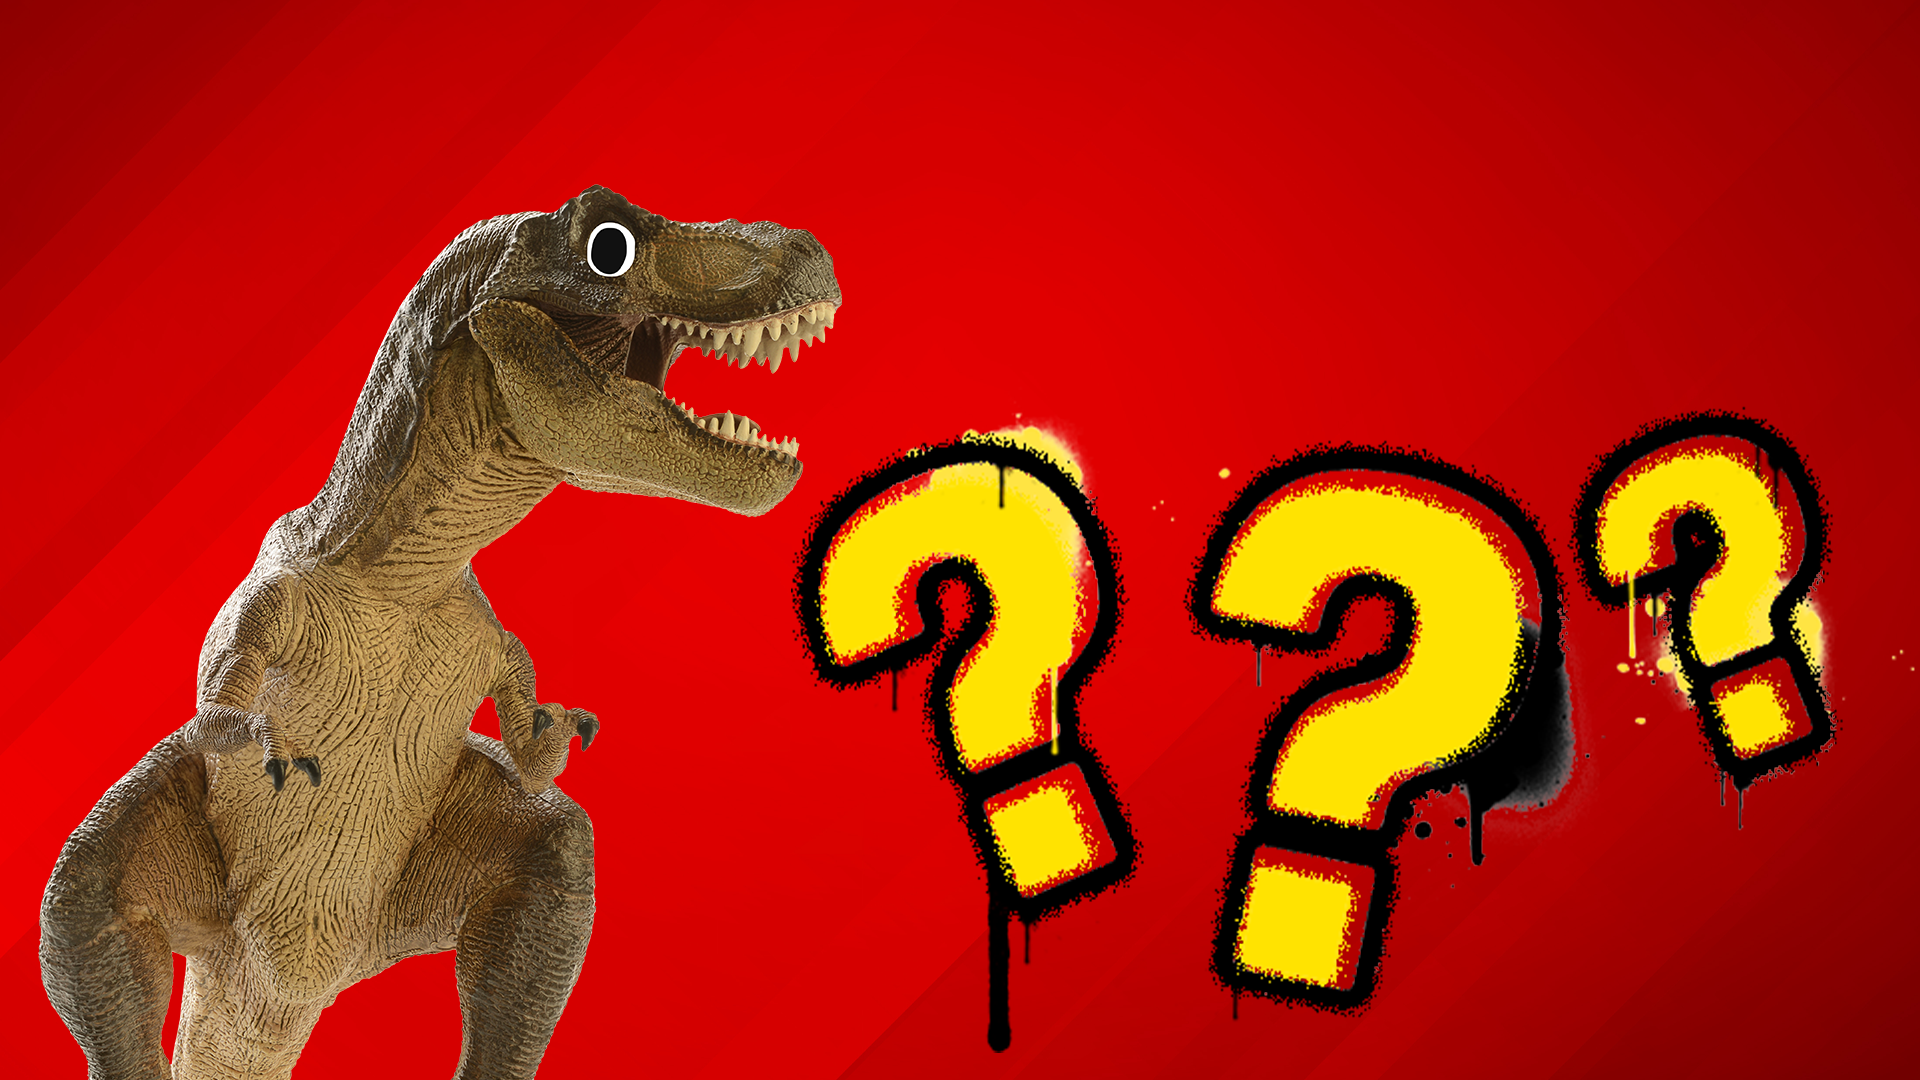 Dinosaur and question marks